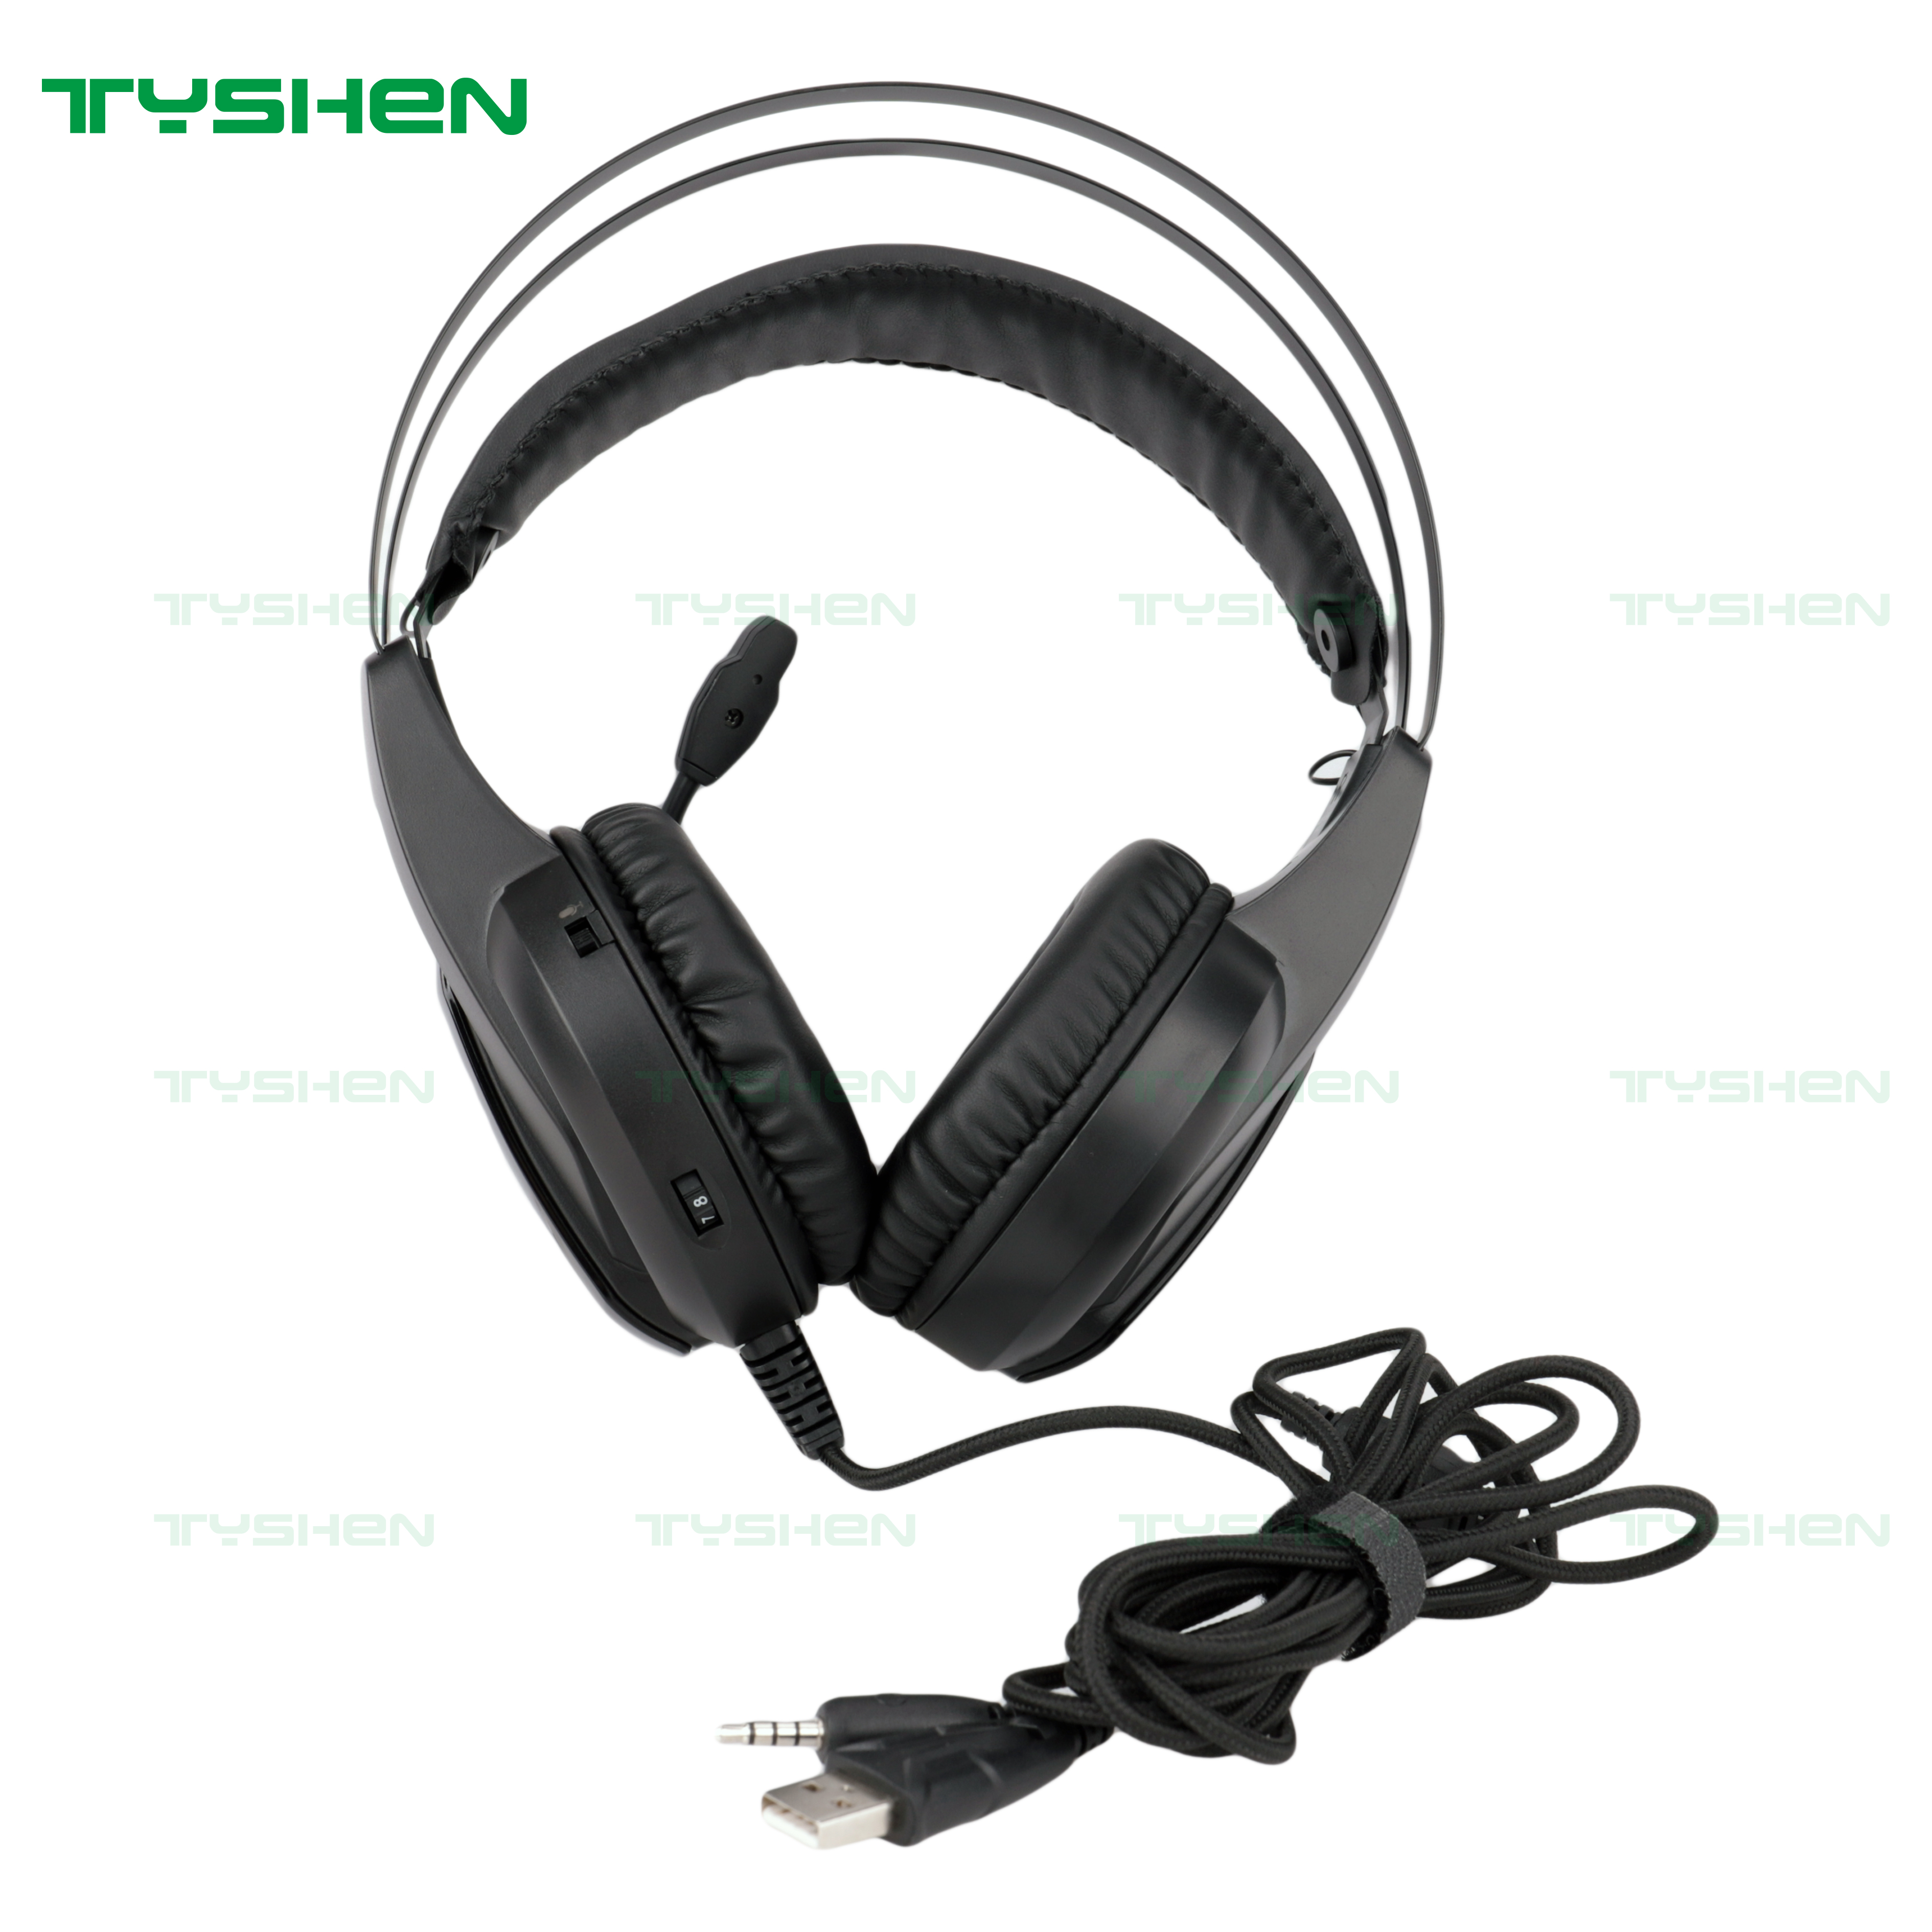 High-End RGB Gaming Headset,7 Color Rainbow LED Lighting,With Mute Button For Mic,In Stock, MOQ:20 Pcs